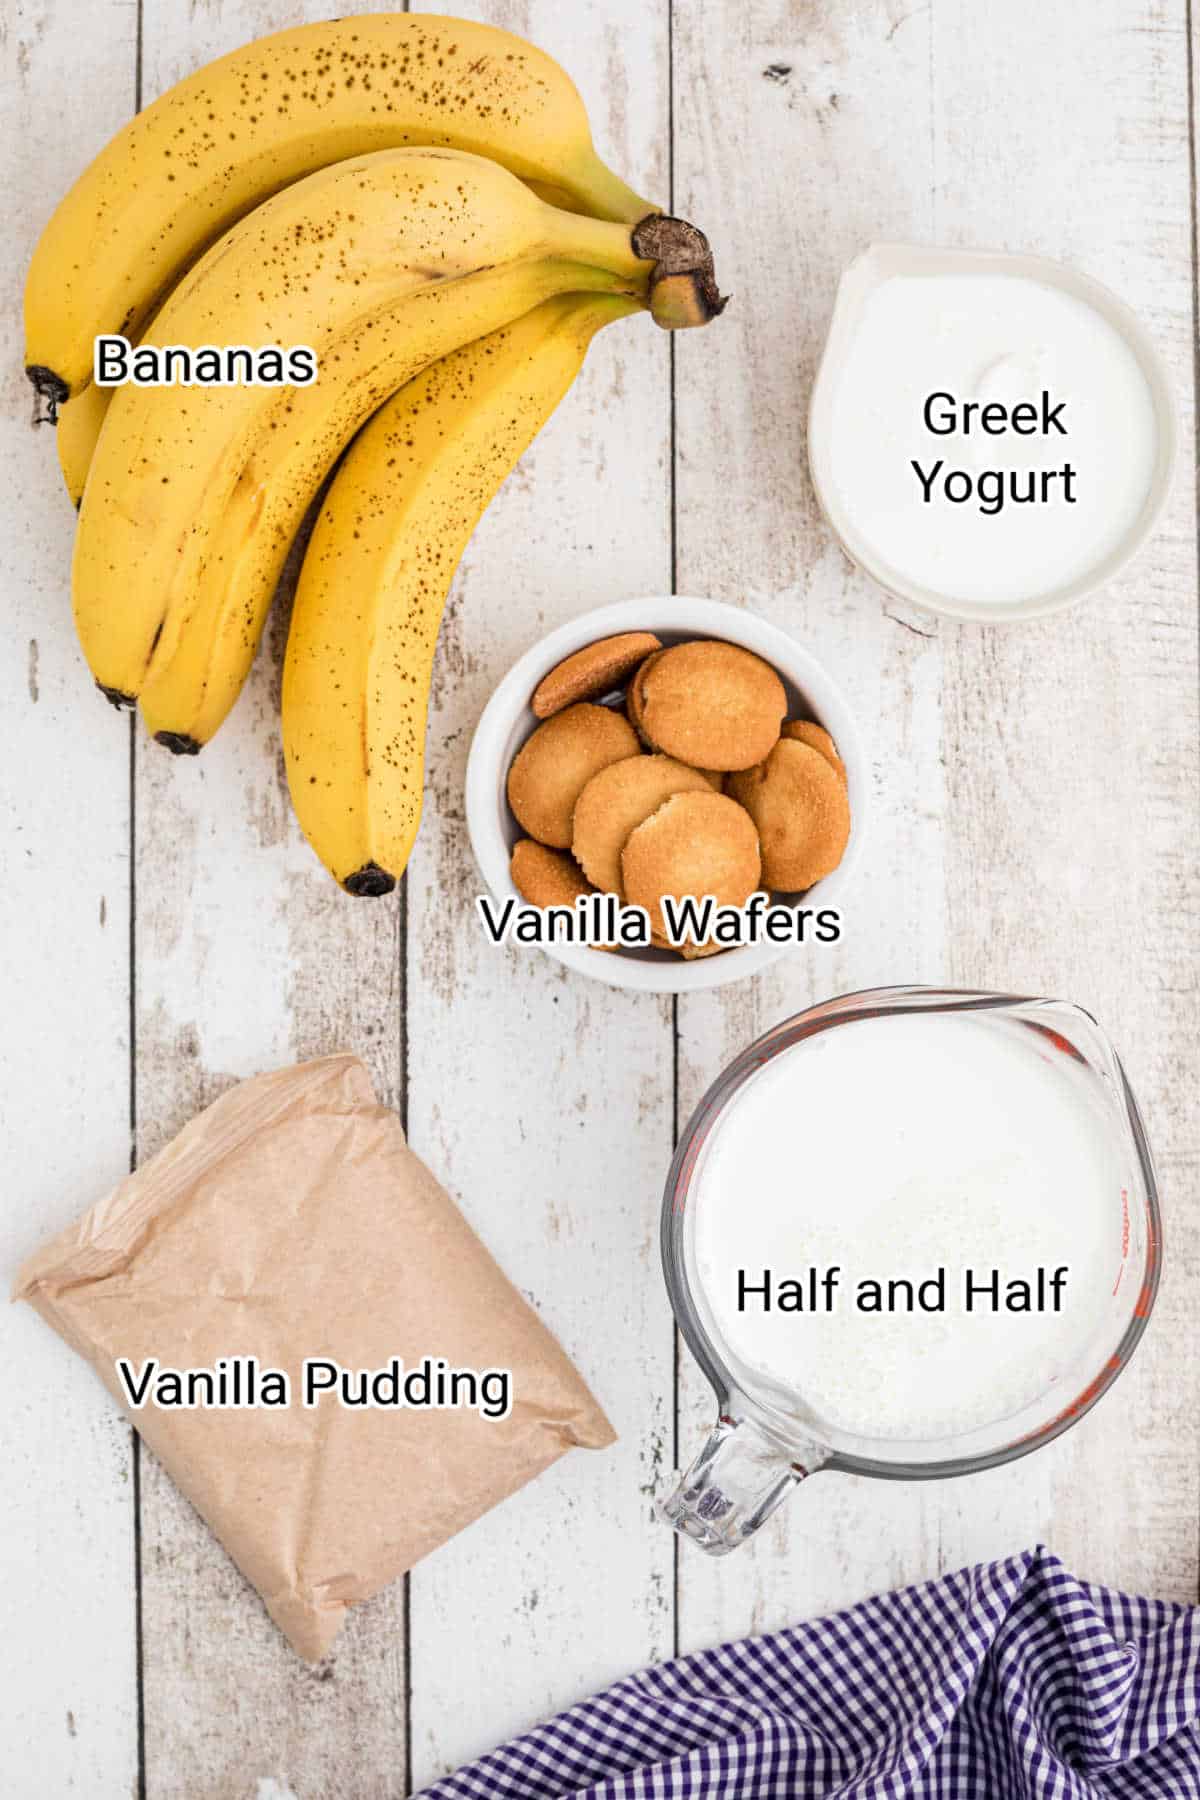 ingredients all laid out for banana pudding popsicles